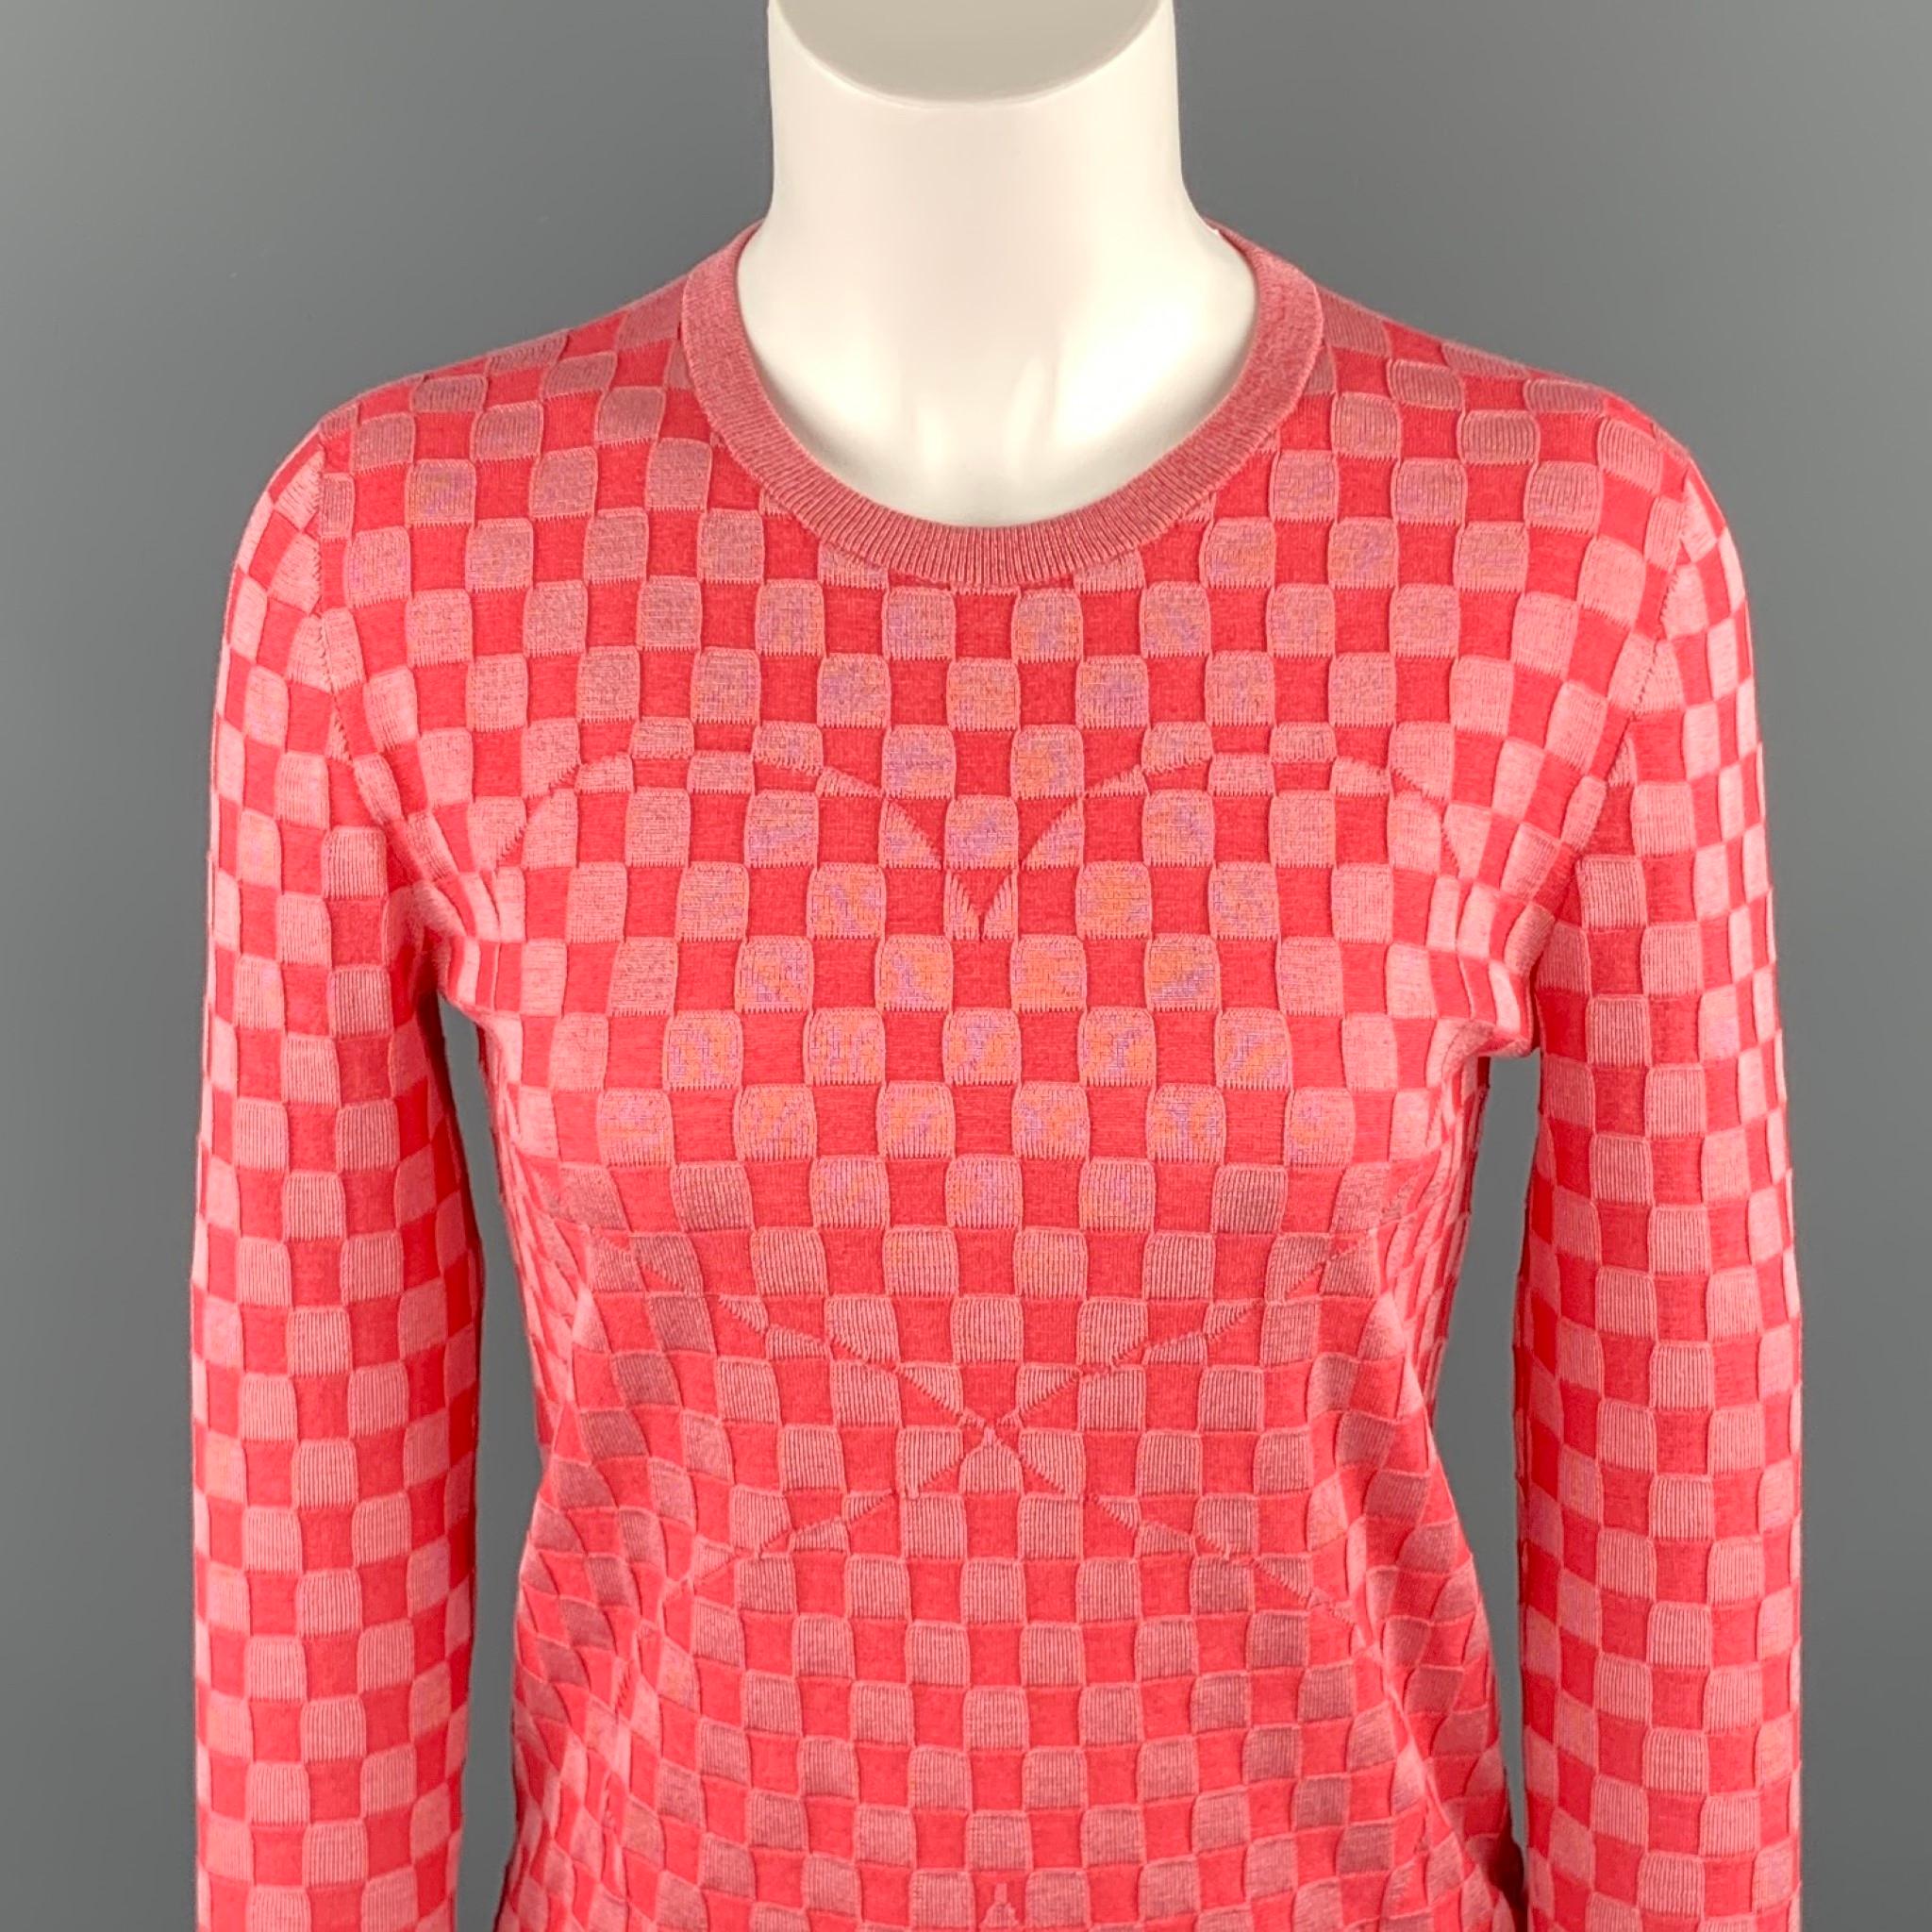 AKRIS pullover comes in a pink checkered silk blend with a hidden heart design featuring a crew-neck. 

Excellent Pre-Owned Condition.
Marked: US 2

Measurements:

Shoulder: 15.5 in. 
Bust: 34 in. 
Sleeve: 21.5 in. 
Length: 21 in.